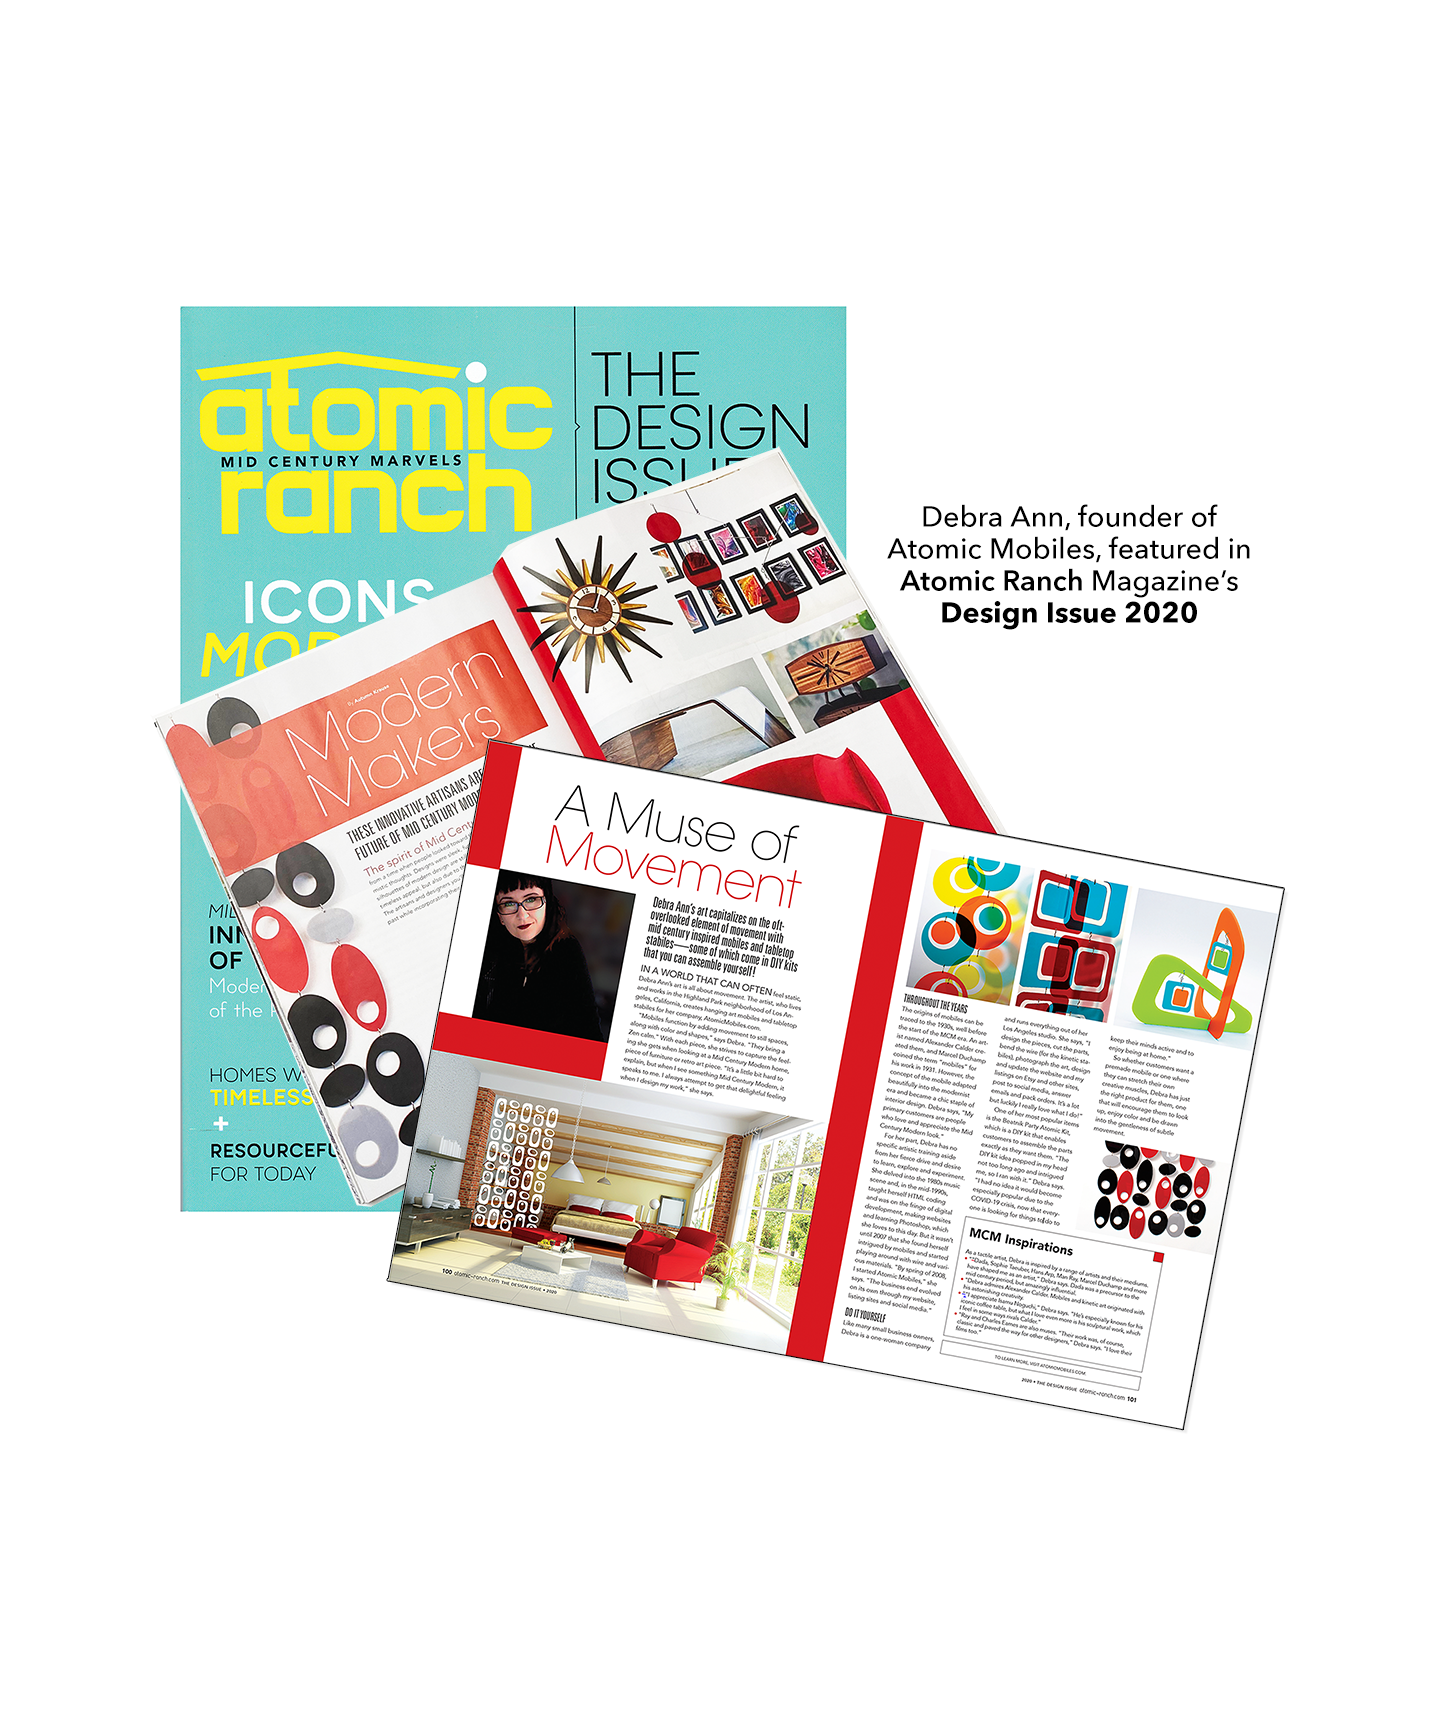 Atomic Mobiles founder and owner Debra Ann is featured in Atomic Ranch Magazine